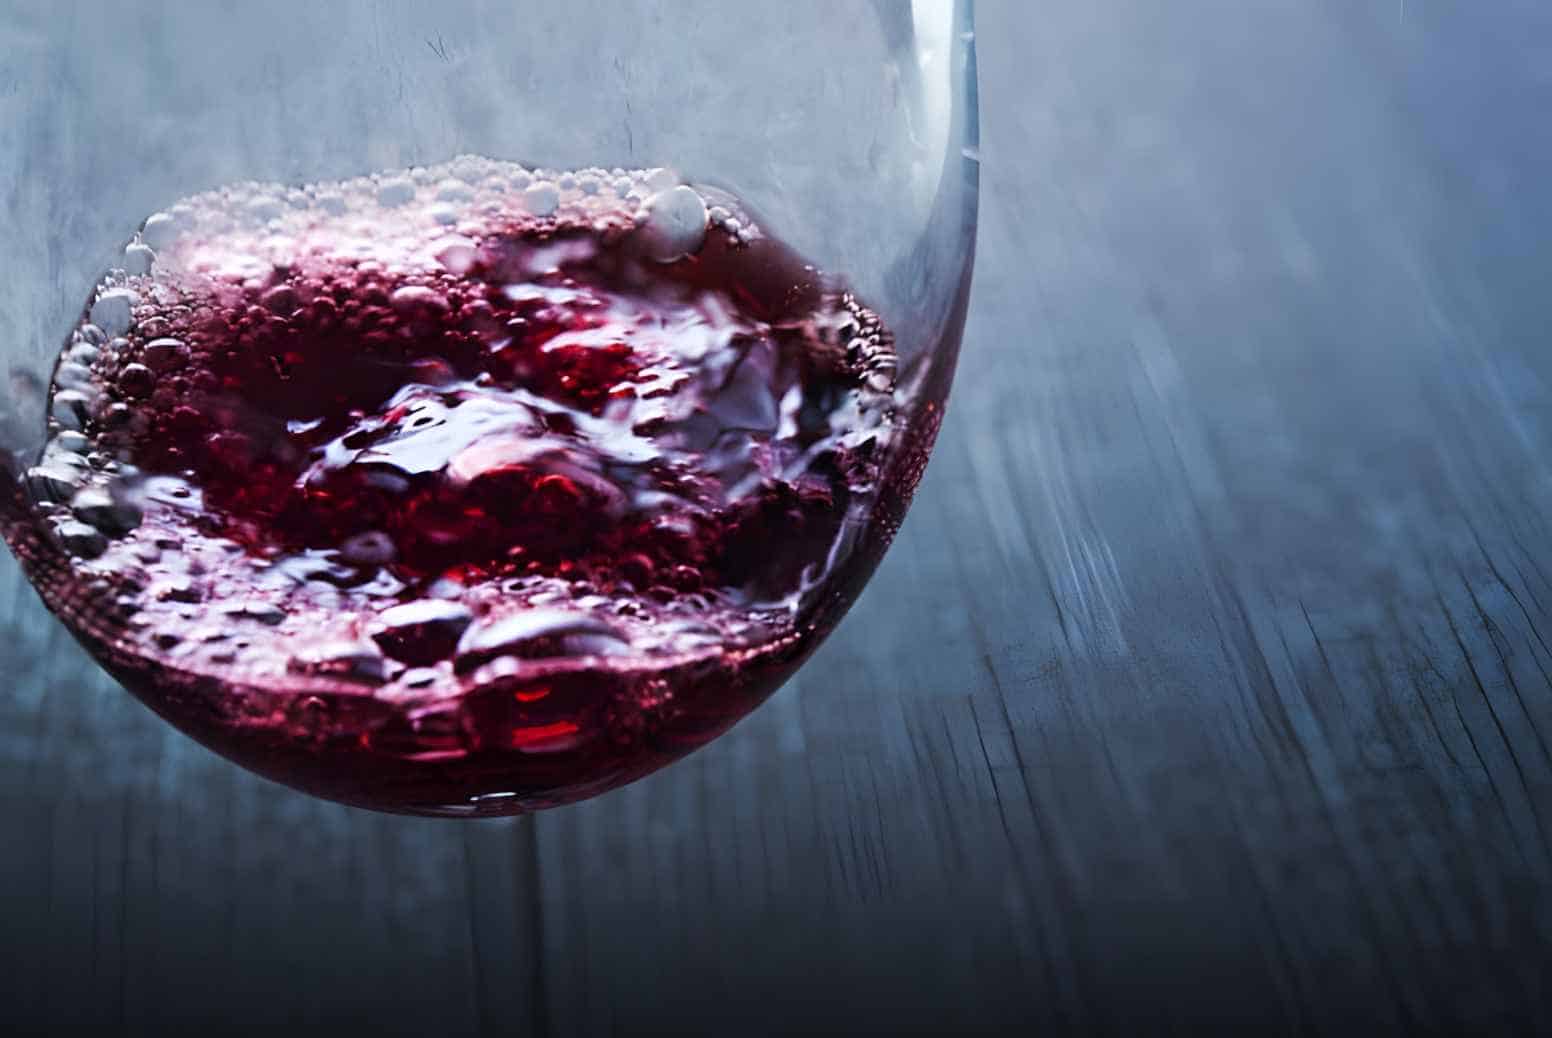 What Are Tannins?